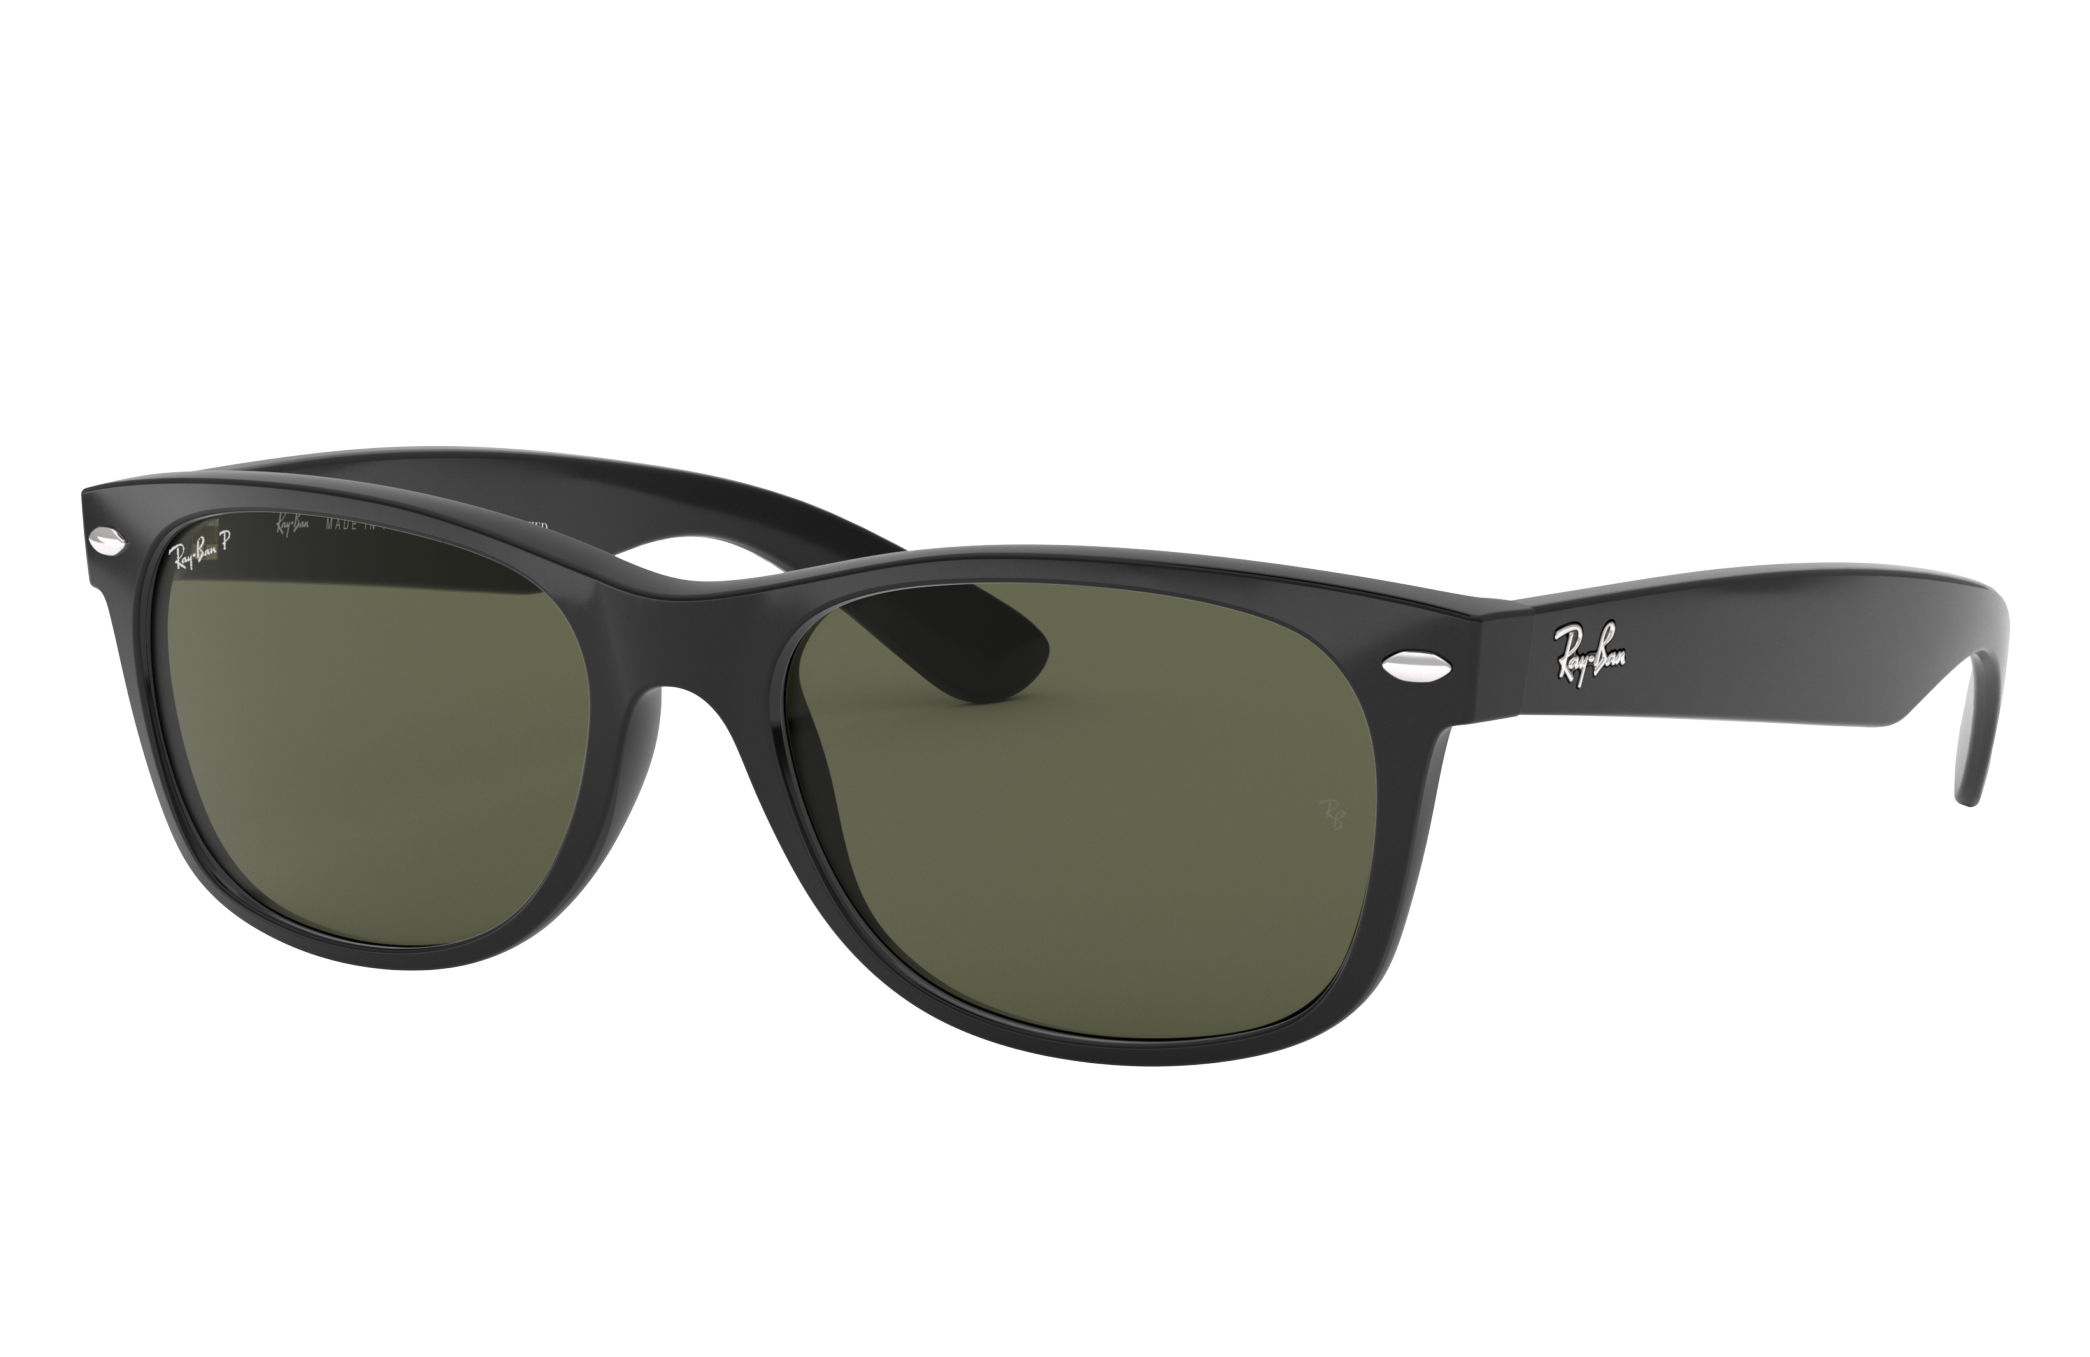 ray ban sunglasses wide faces